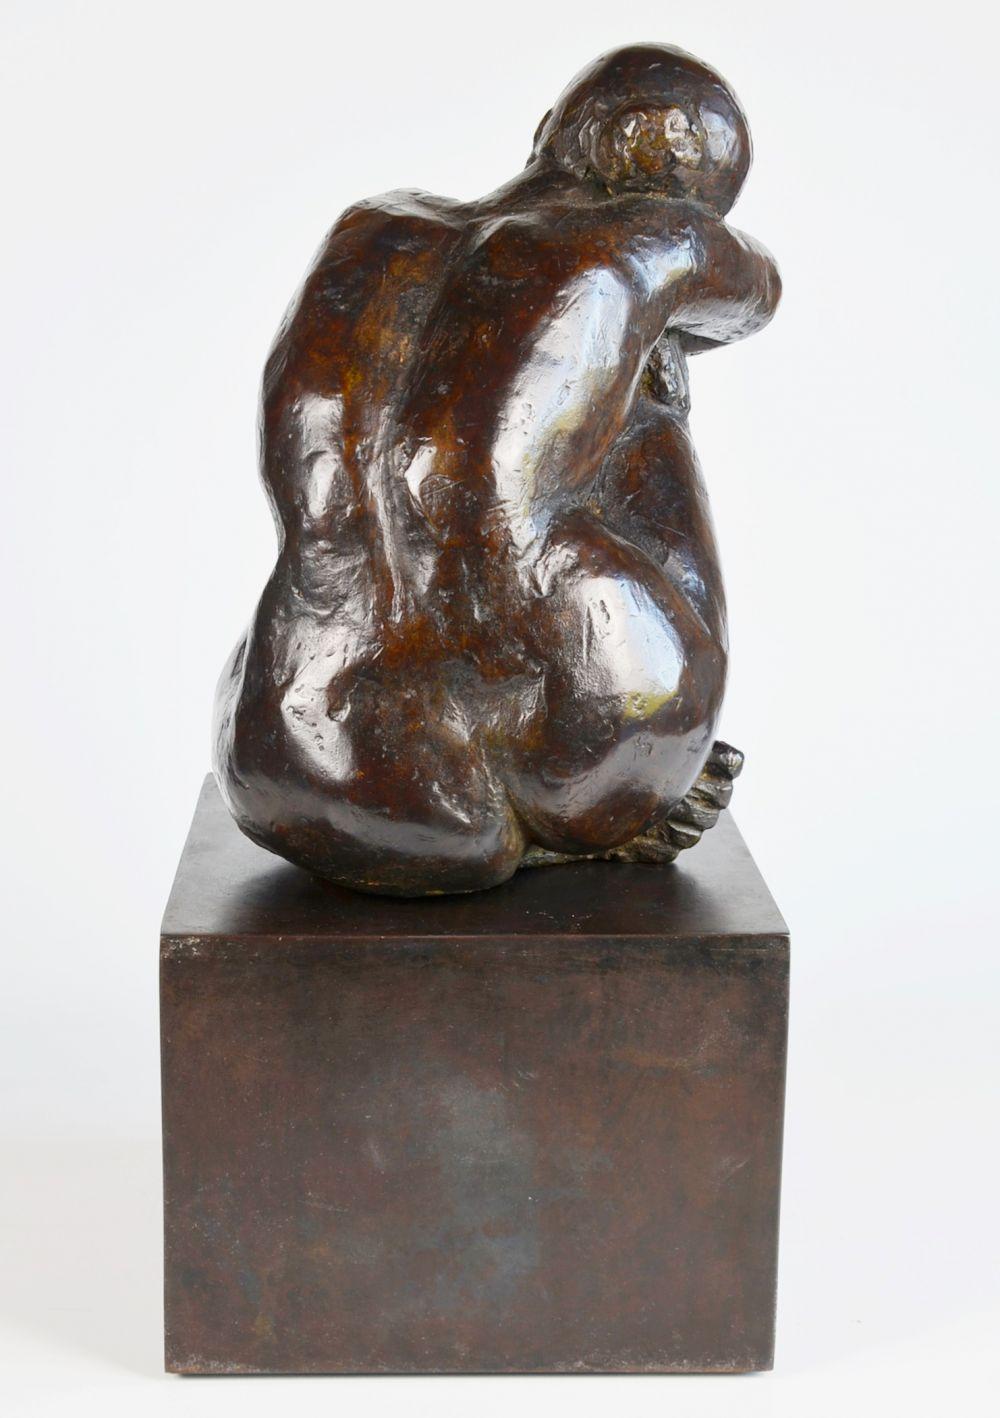 Thought is a bronze sculpture by Yann Guillon of a reflexive woman sitting head on shoulder. This French contemporary artist focuses his work on the human body, using an expressionist approach to convey alternately strength or sensuality. 